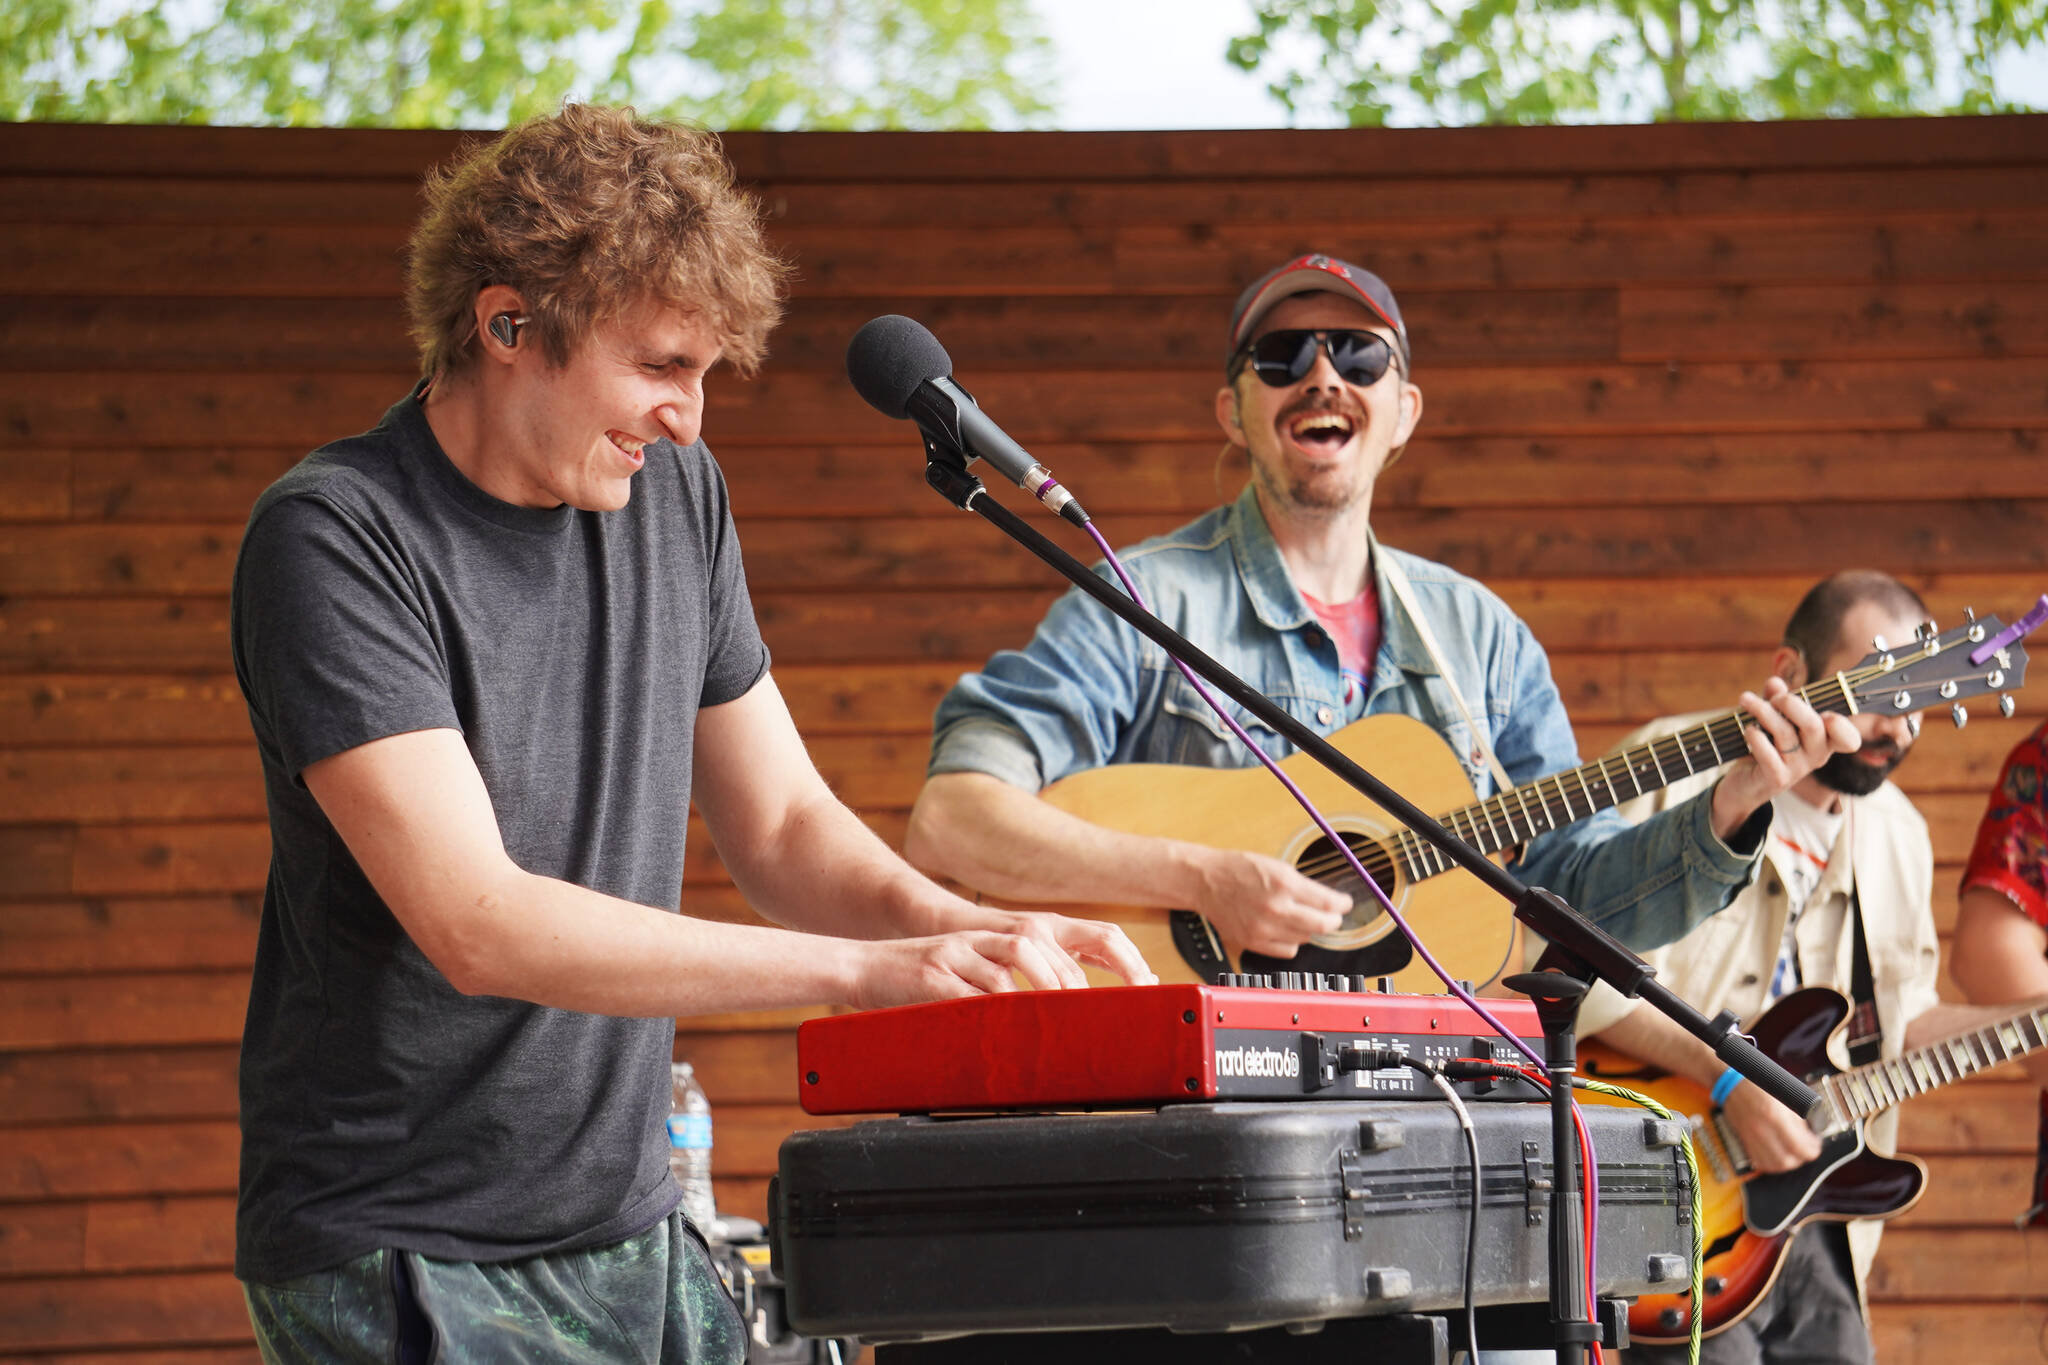 Blackwater Railroad Company’s Kyle Comeau performs a piano solo, cheered on by Tyson Davis, during the Levitt AMP Soldotna Music Series on Wednesday, June 7, 2023, at Soldotna Creek Park in Soldotna, Alaska. (Jake Dye/Peninsula Clarion)